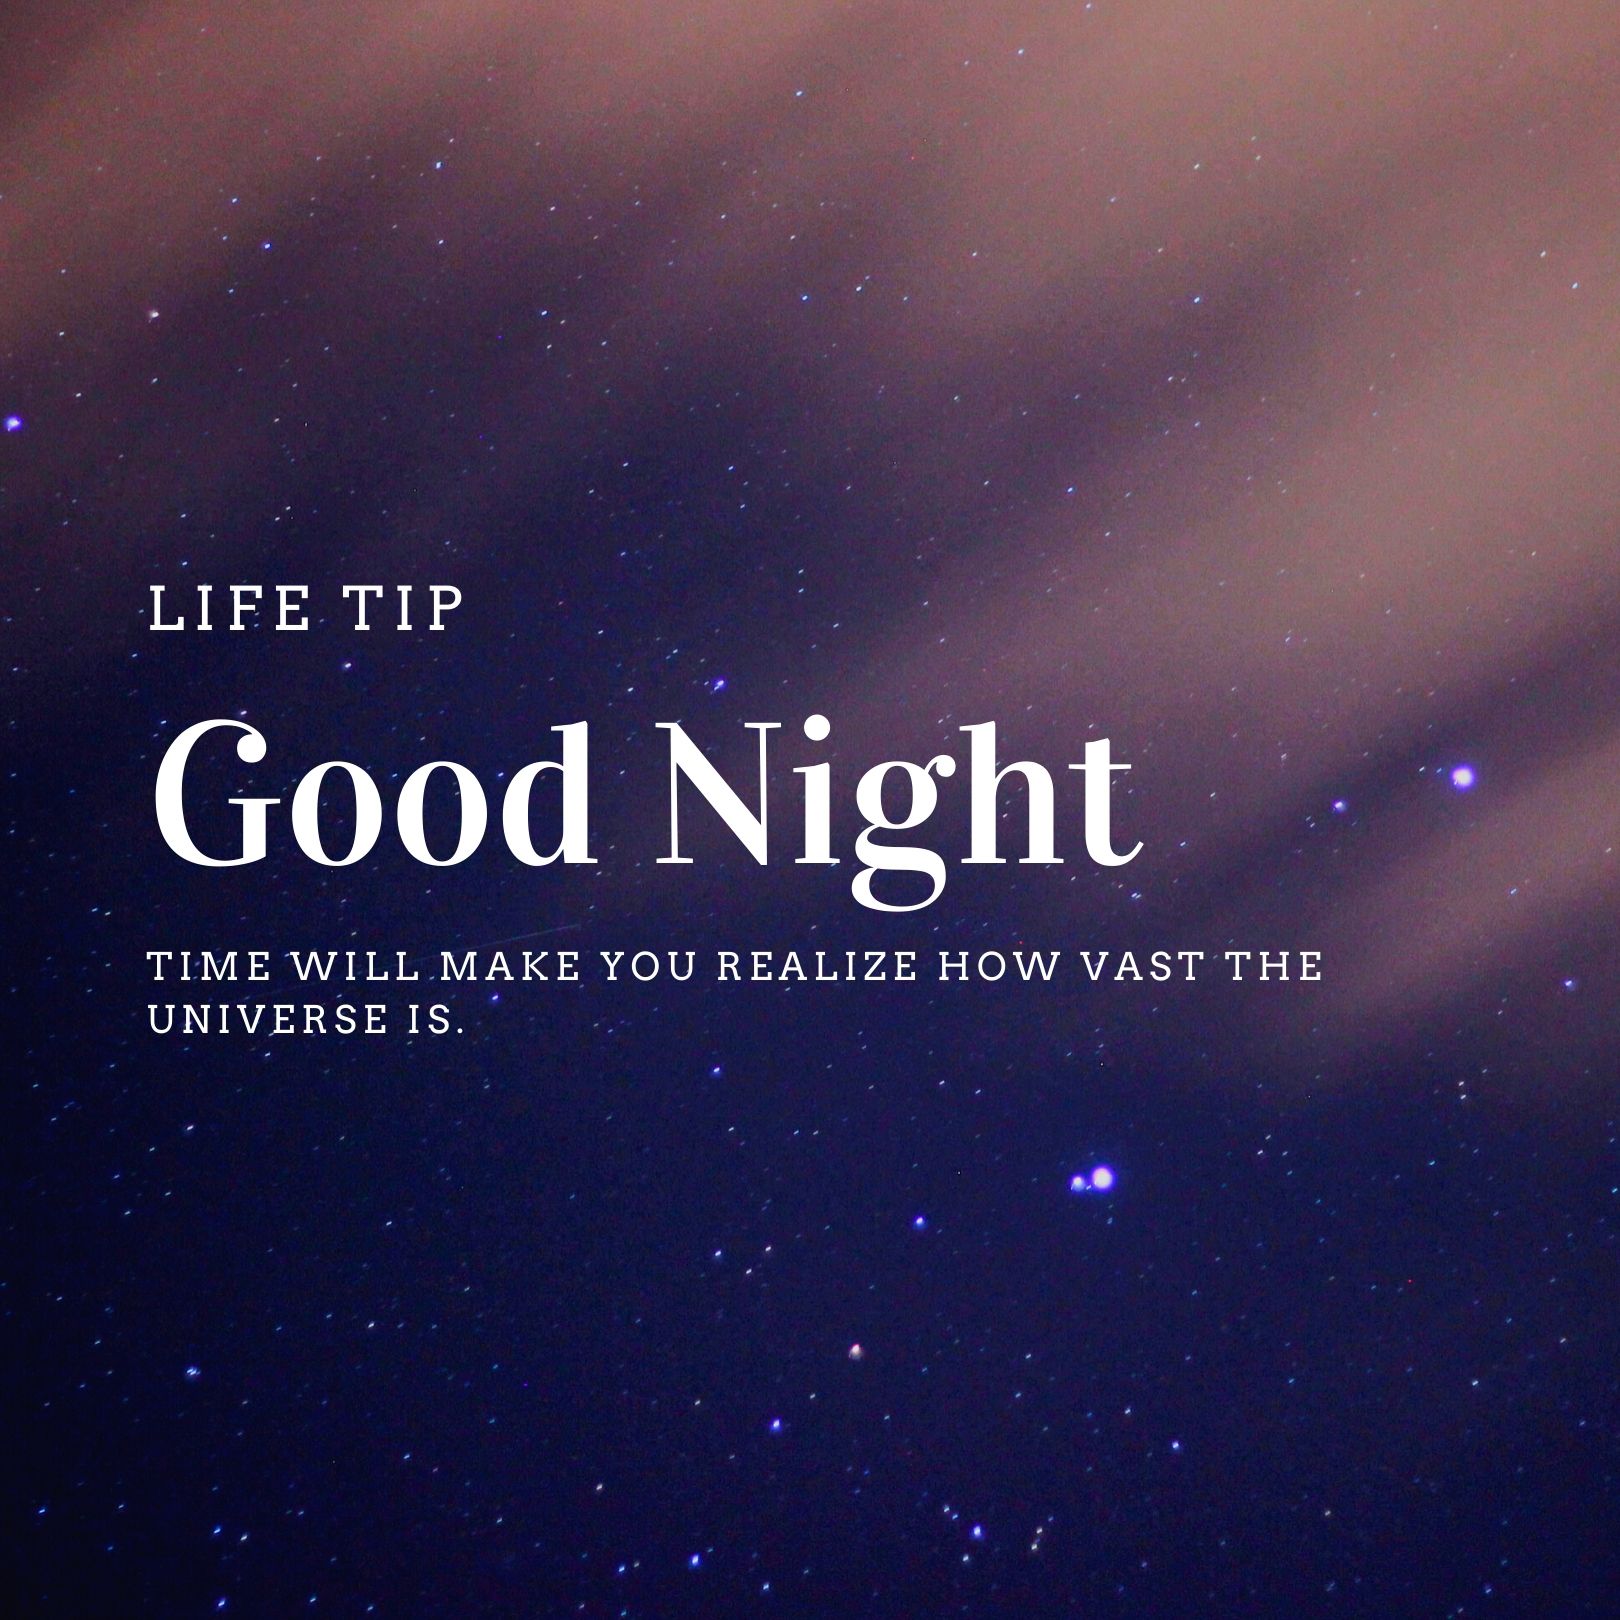 Good Night Life Tip- Time will make you realize how vast the universe is.